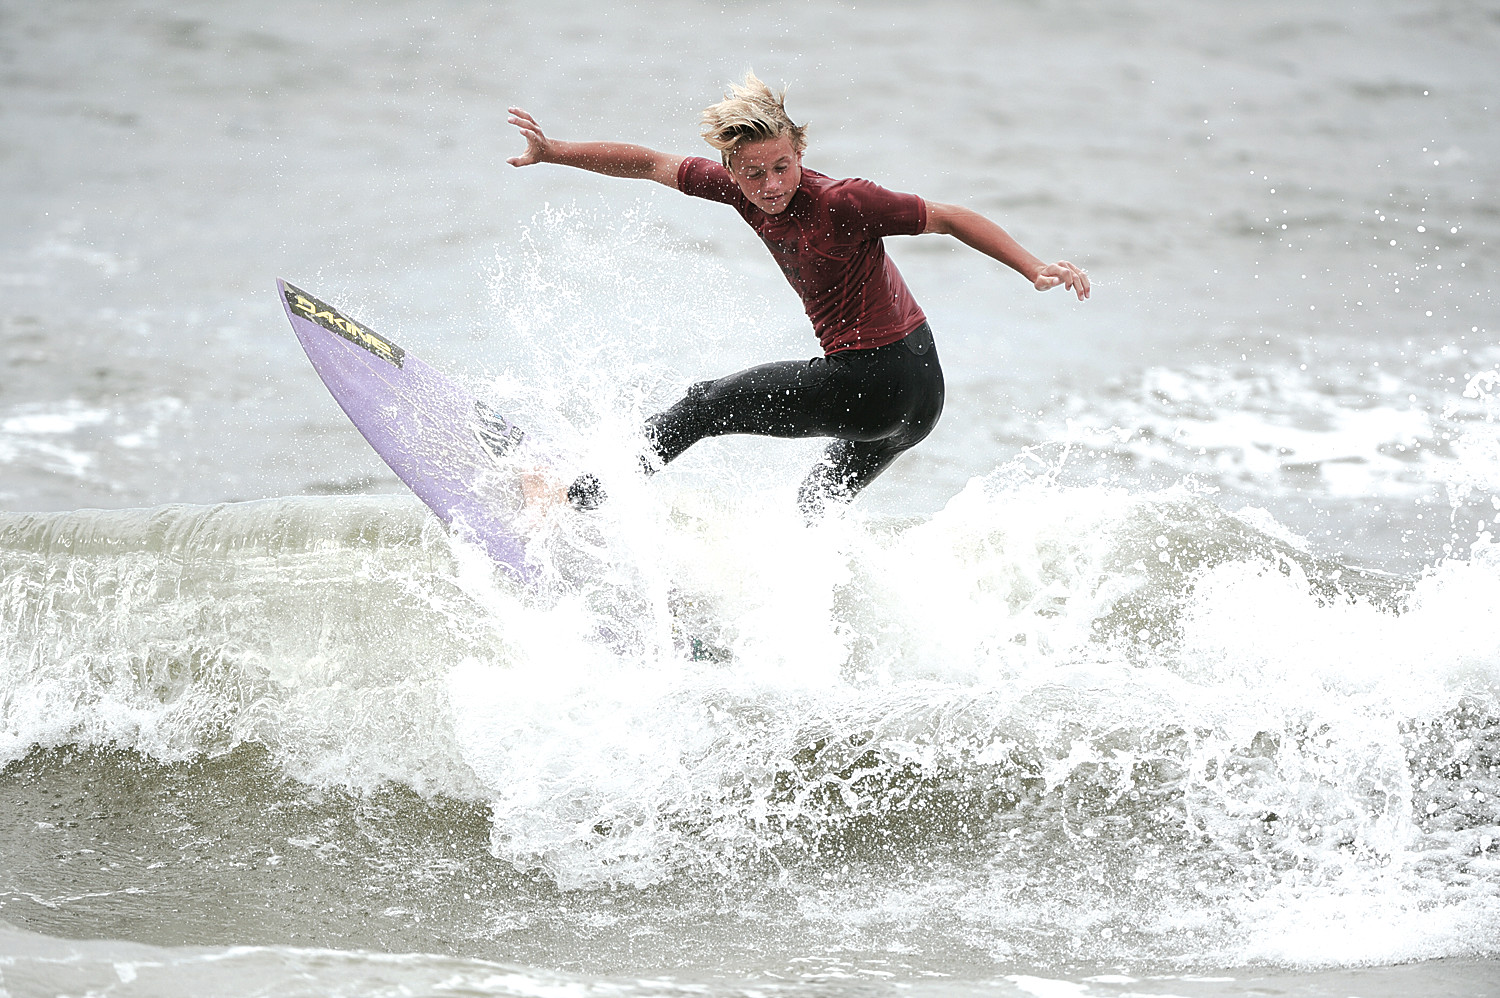 Logan Kamen finished second in the kids’ surfing event.